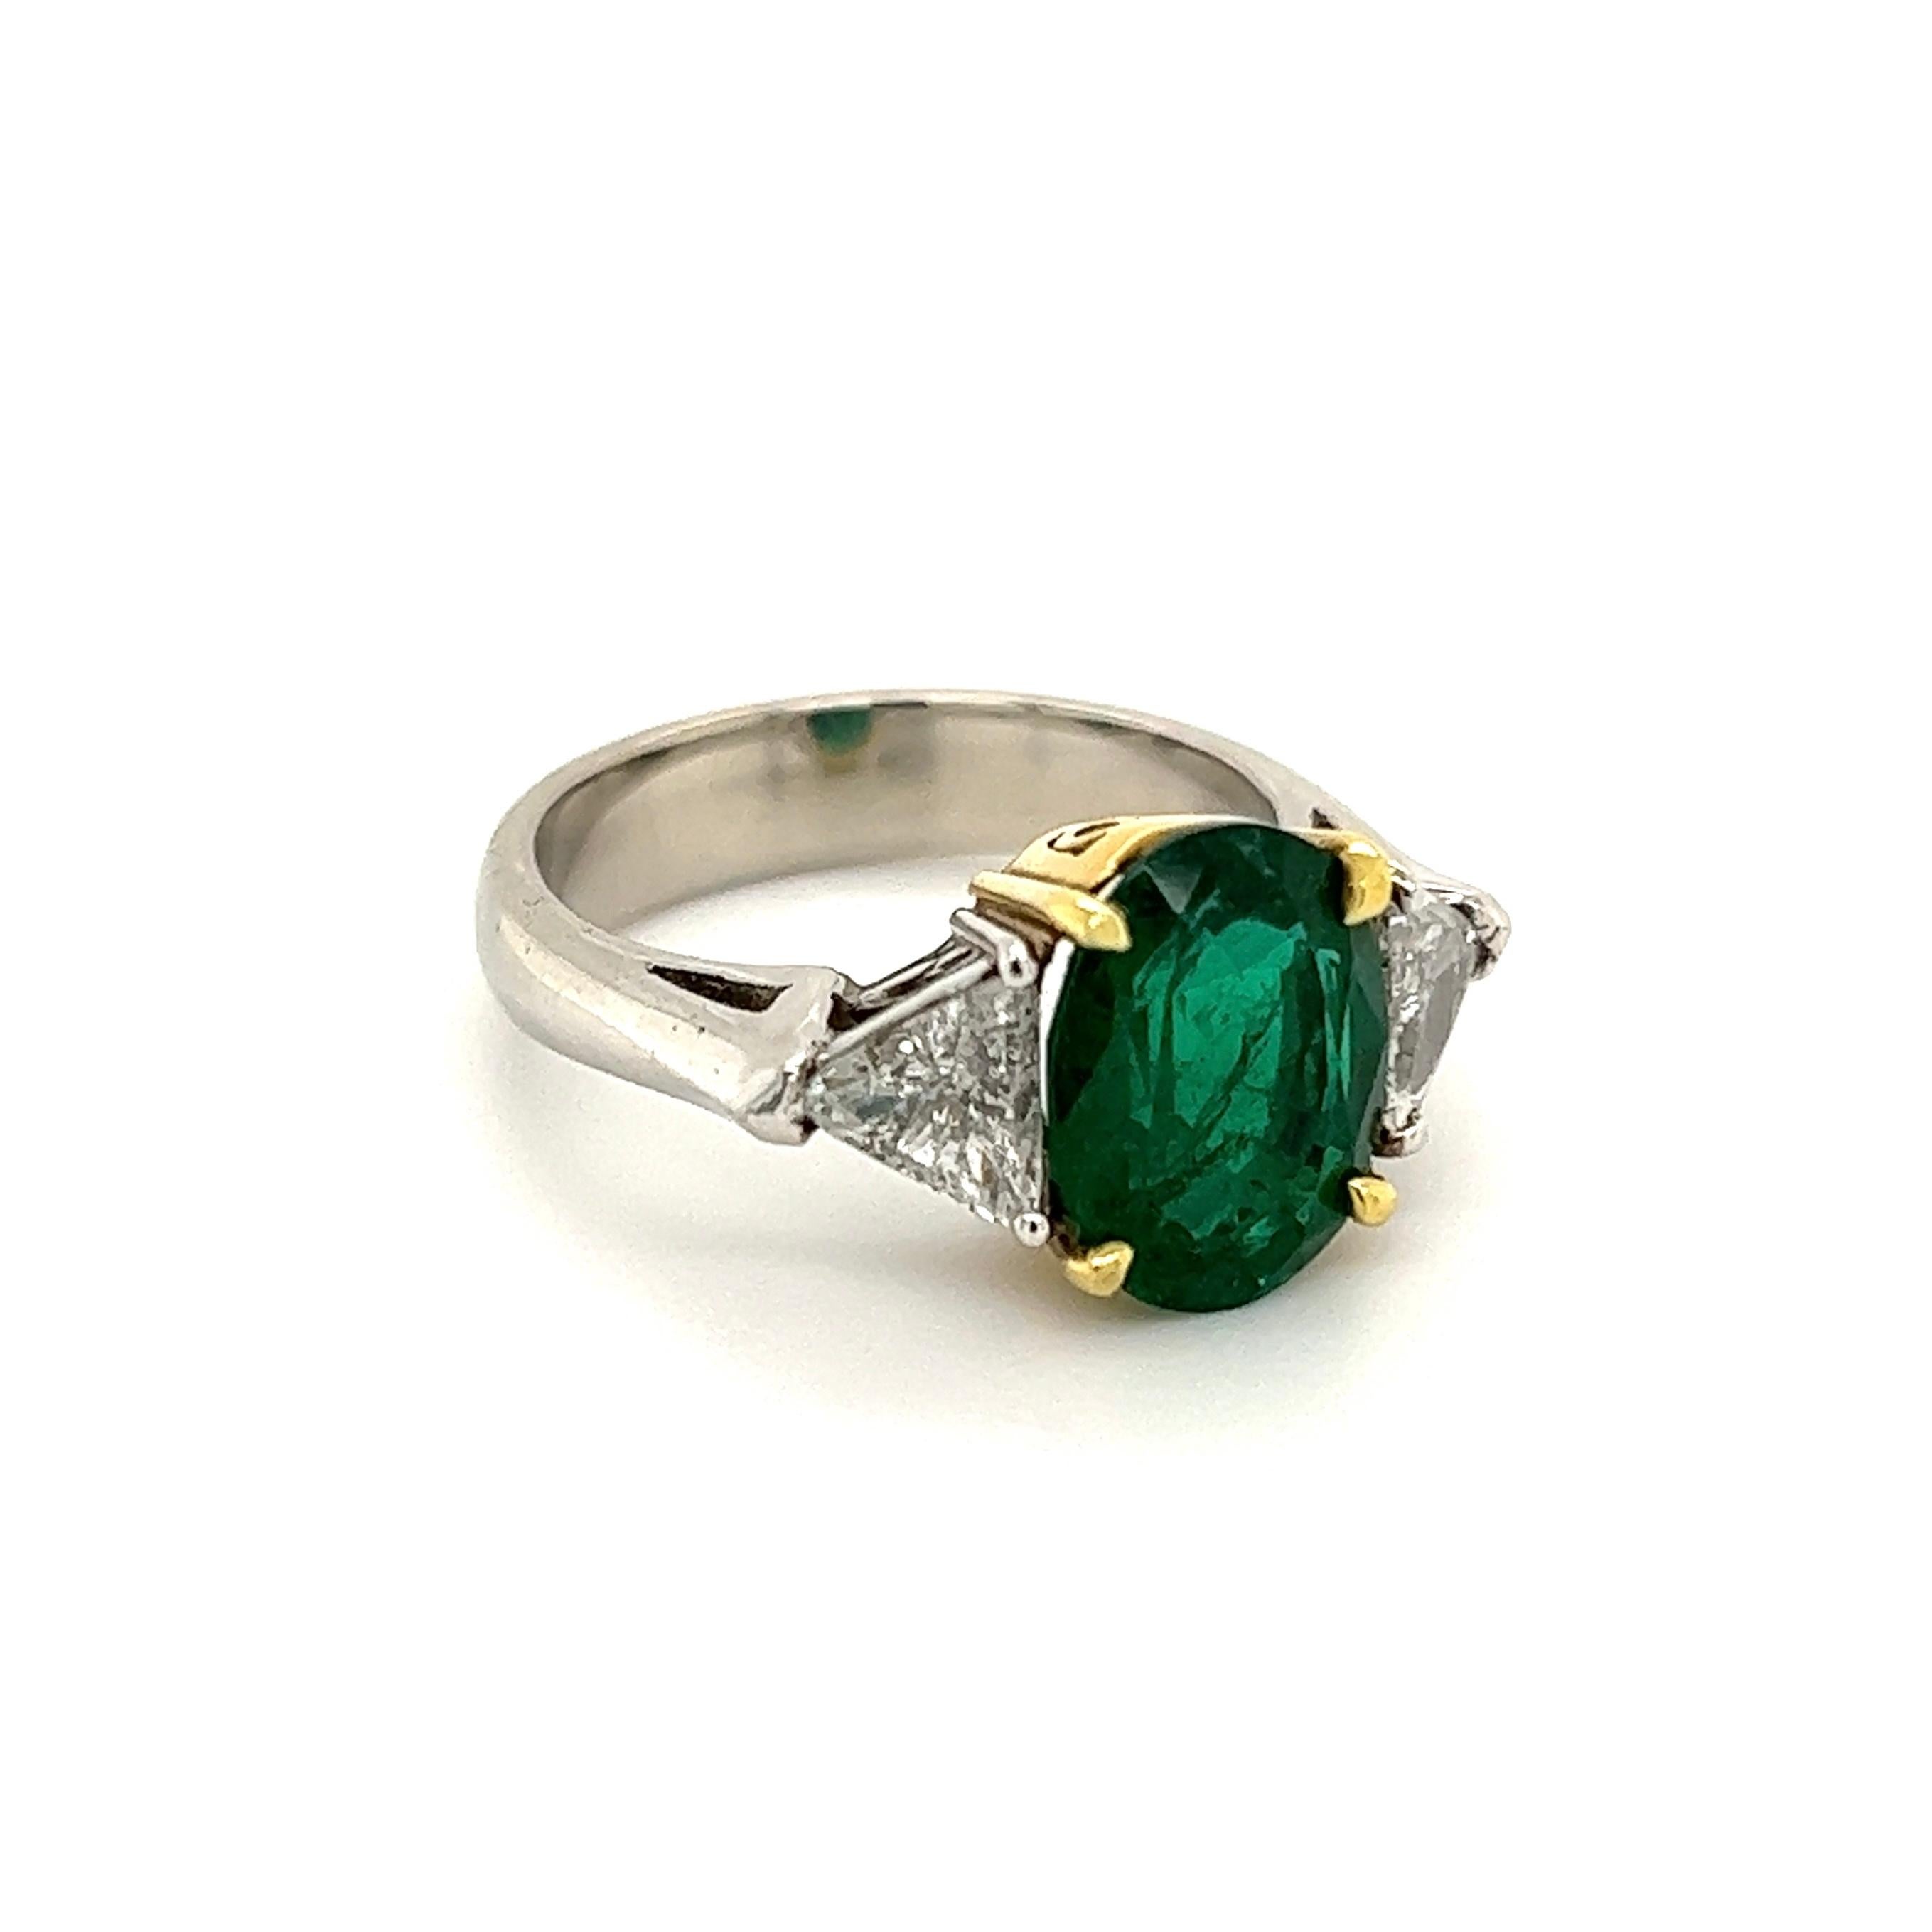 Simply Beautiful! Elegant and finely detailed Art Deco Revival 3-Stone Platinum Ring, center securely nestled Hand set with a securely nestled Oval Emerald, weighing approx. 3.74 Carats with a Trillion Diamond on either side; approx. 0.63tcw. The